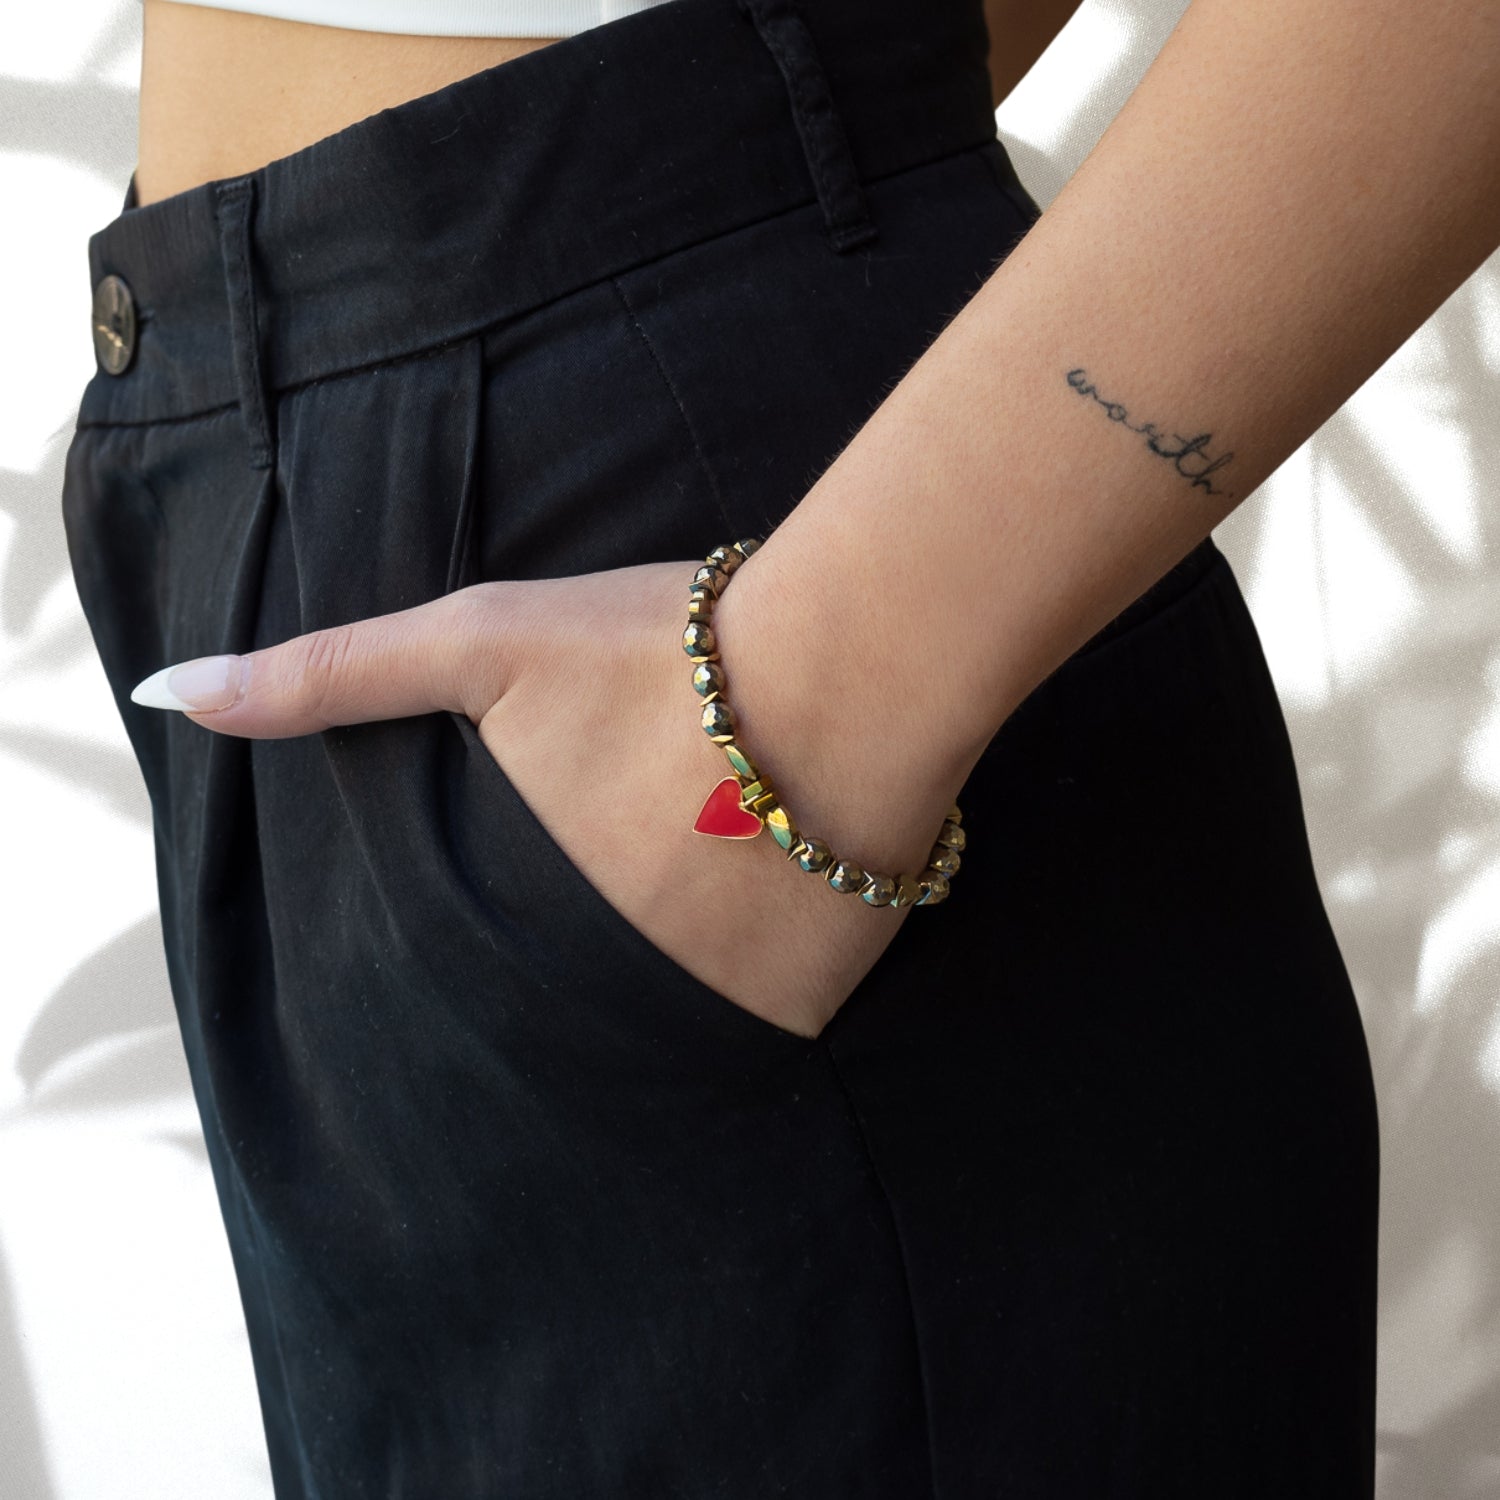 The hand model showcases the Red Heart Love Bracelet, a symbol of love and elegance, adding a touch of charm to her ensemble.